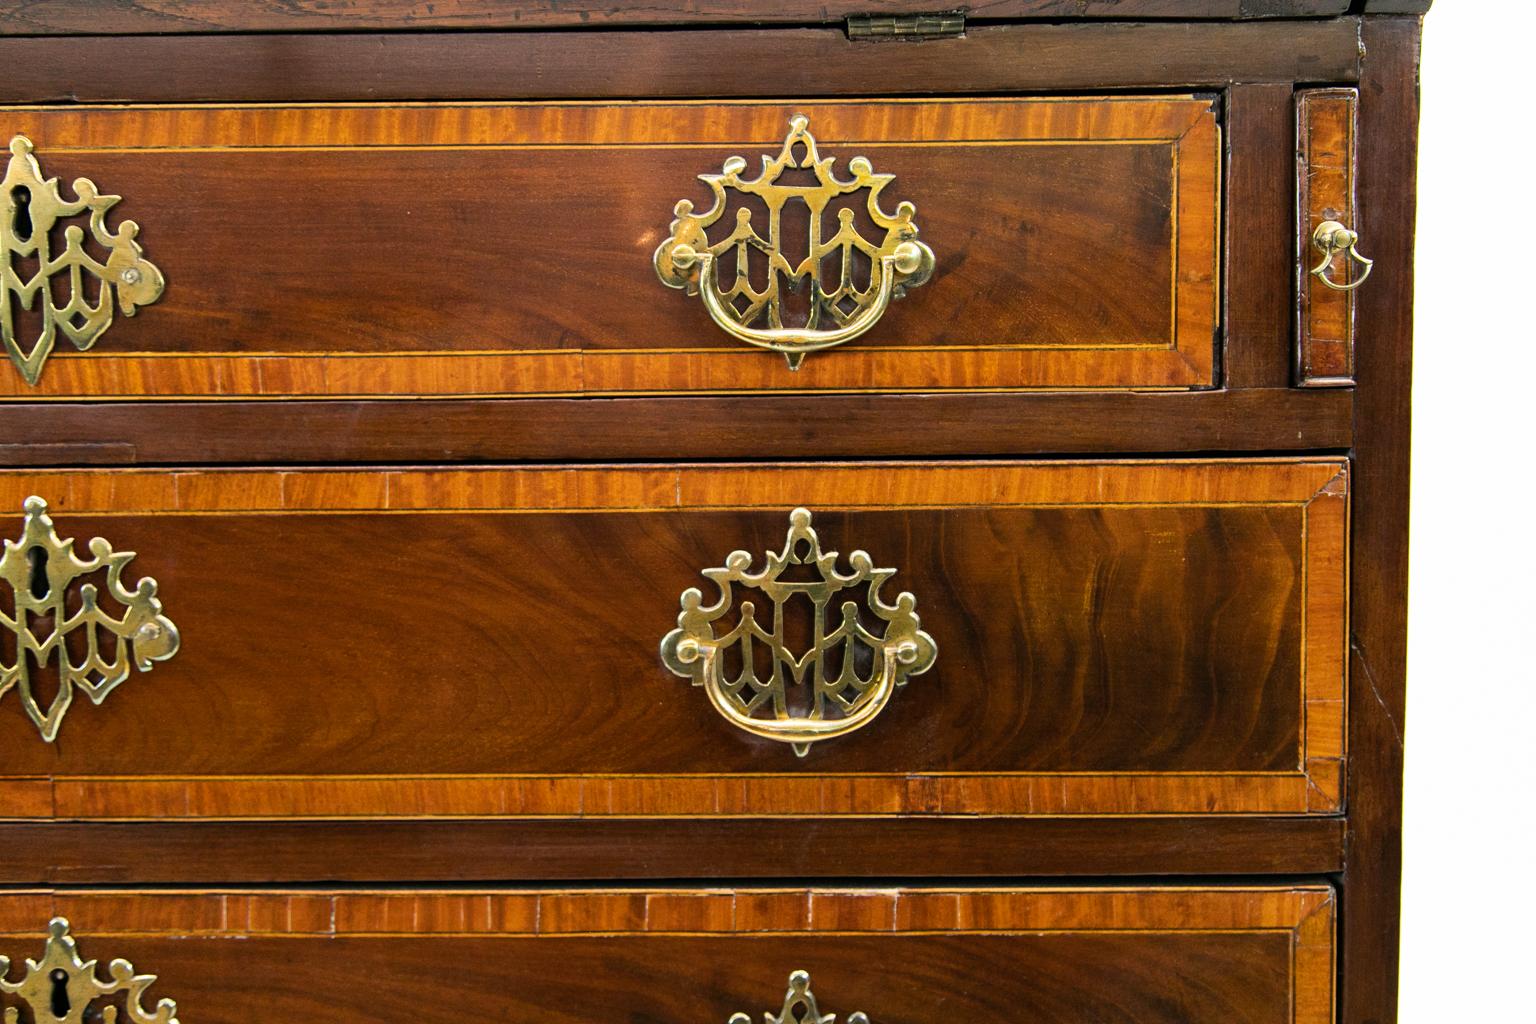 George III inlaid slant top desk, the top and fall board crossbanded with satinwood and ebony, the fall board also inlaid with quarter fans and shell, the drawers are also banded with satinwood and ebony. Trellis brasses are original.
  